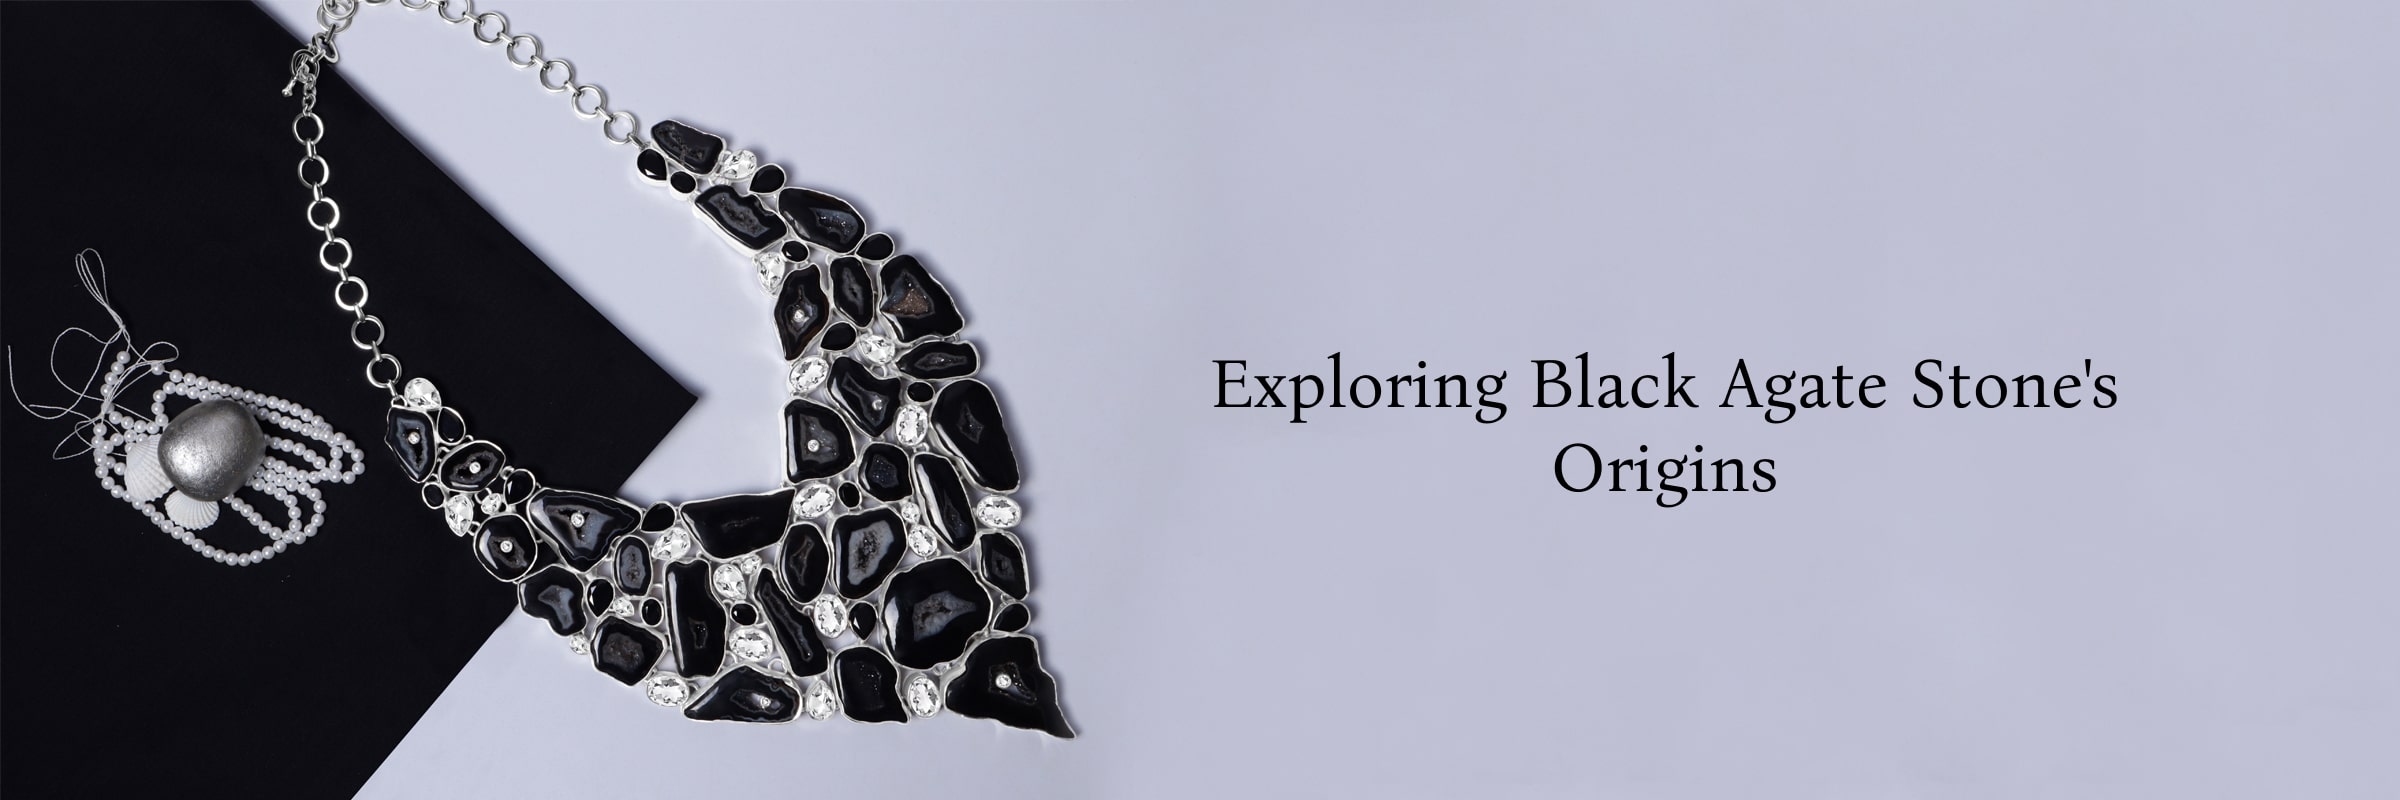 History of Black Agate Stone